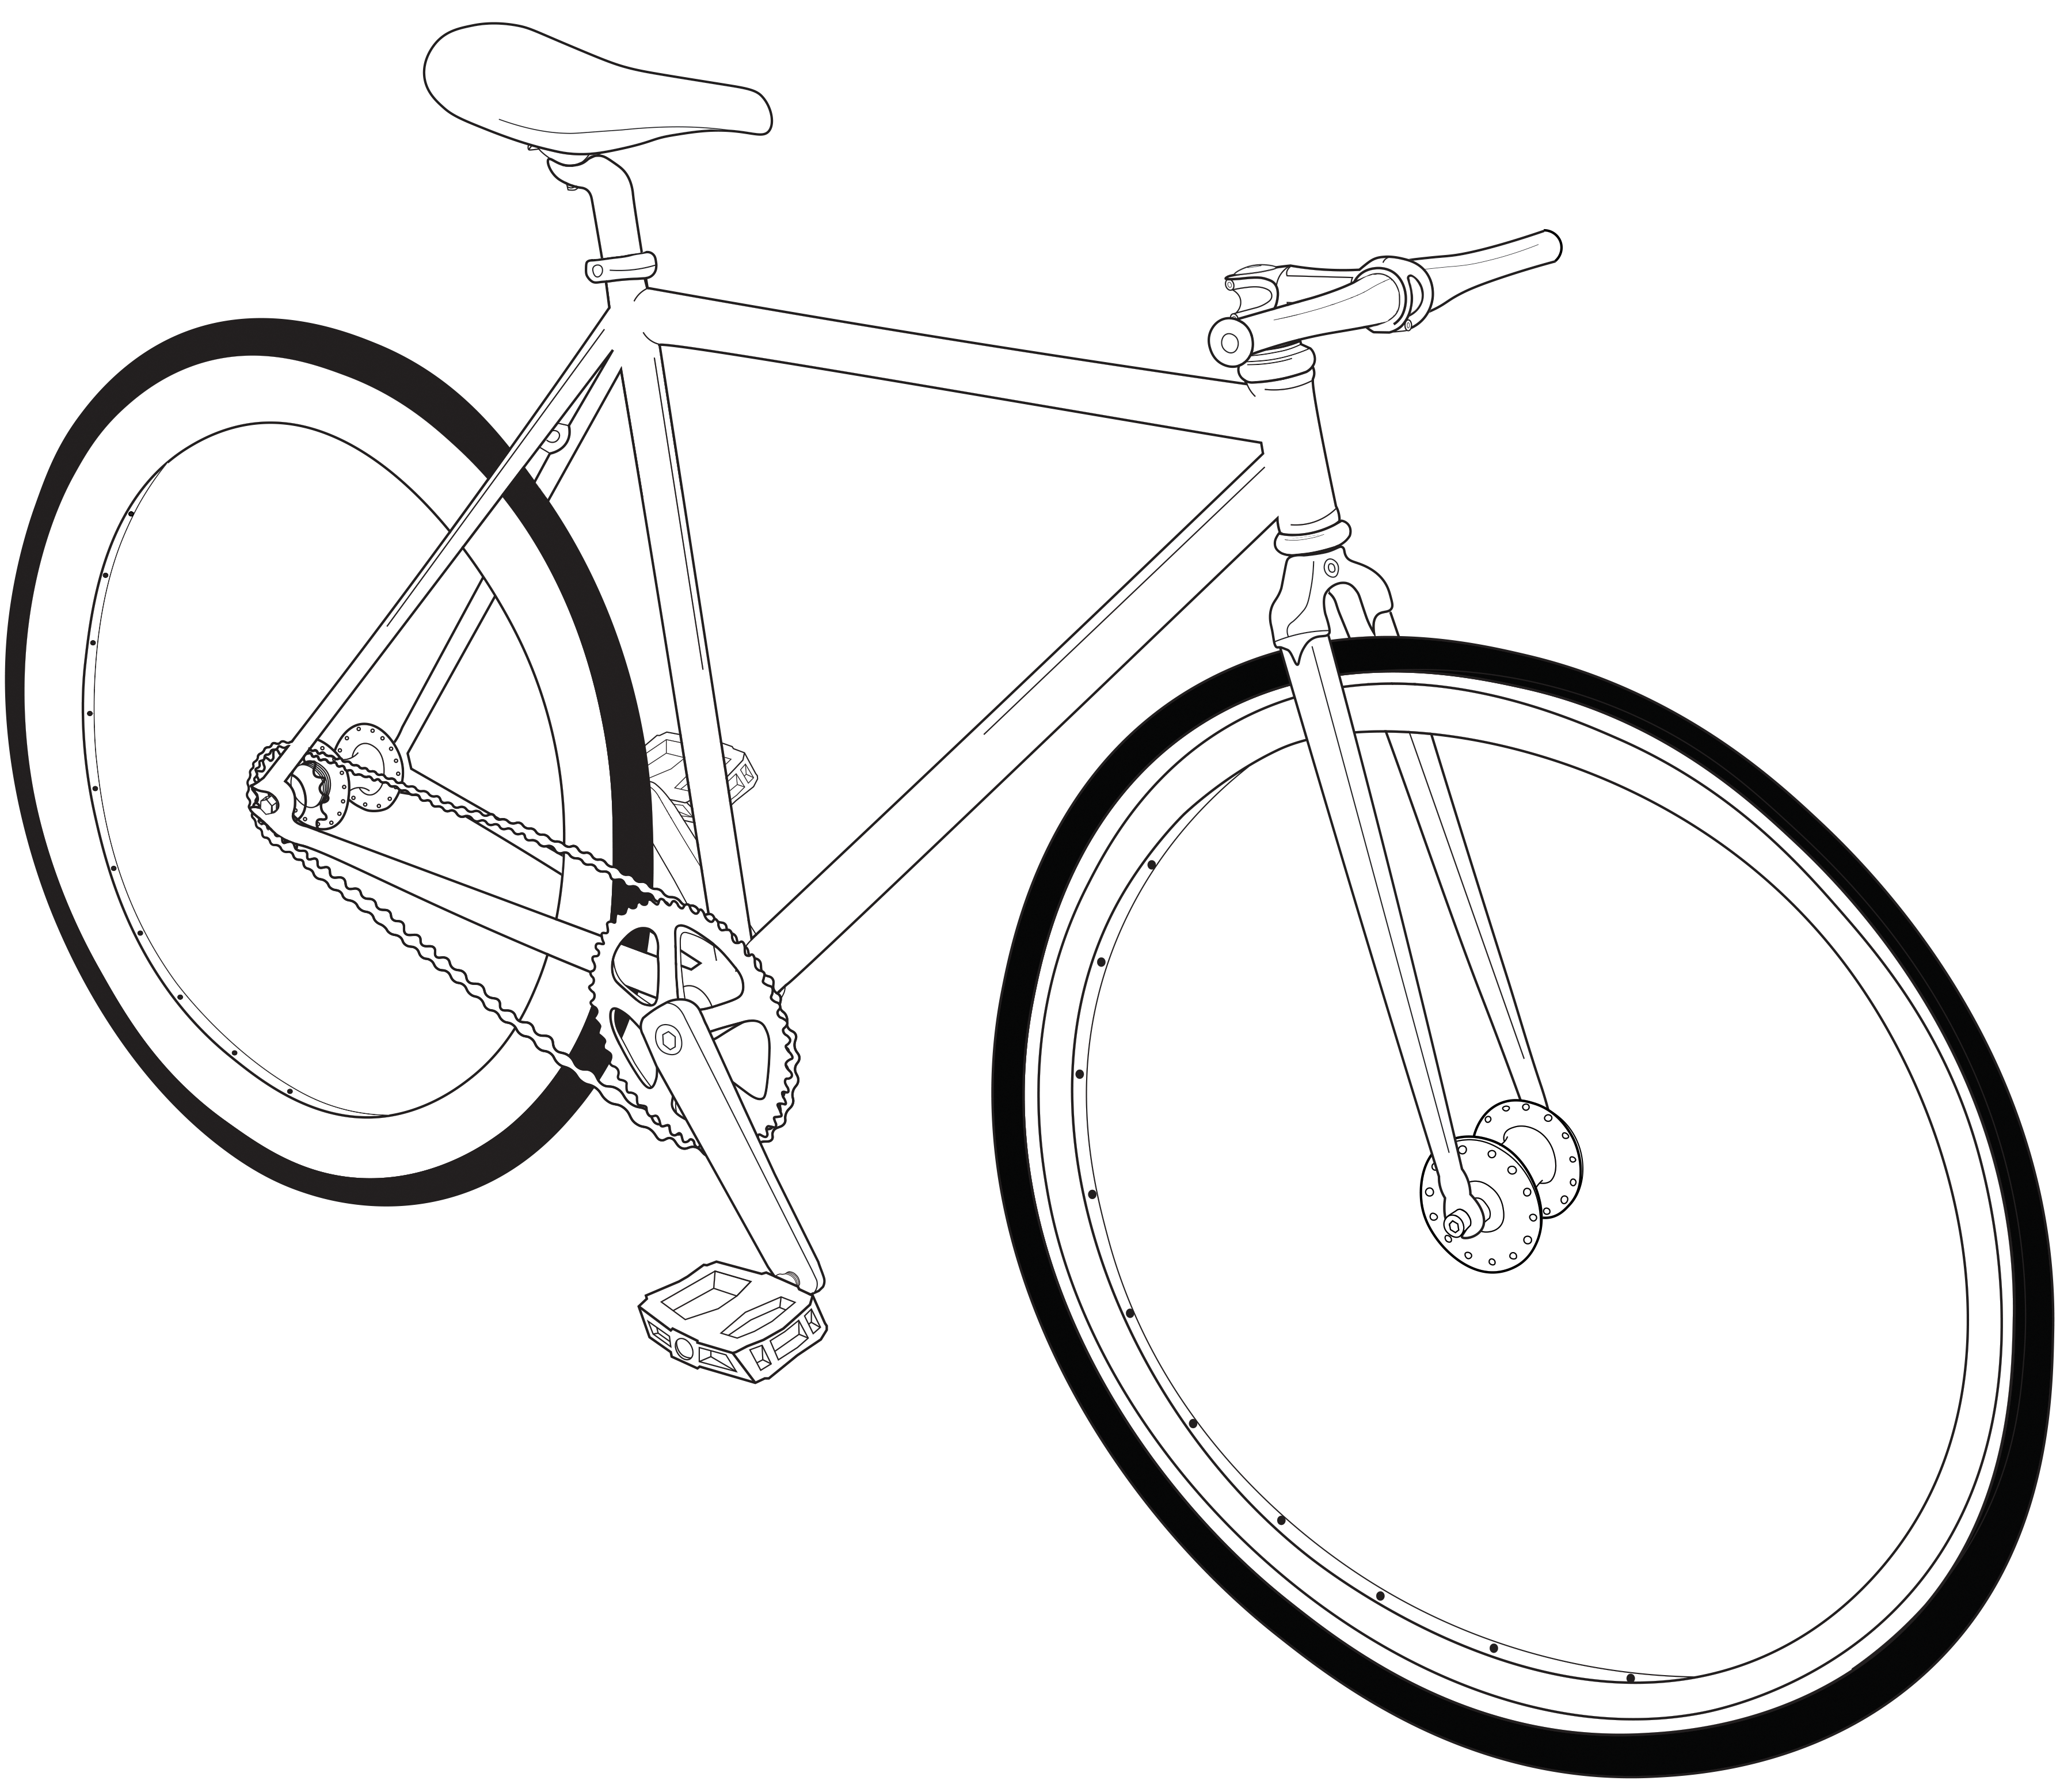 A fairly accurate digital illustration of my bike (finally)